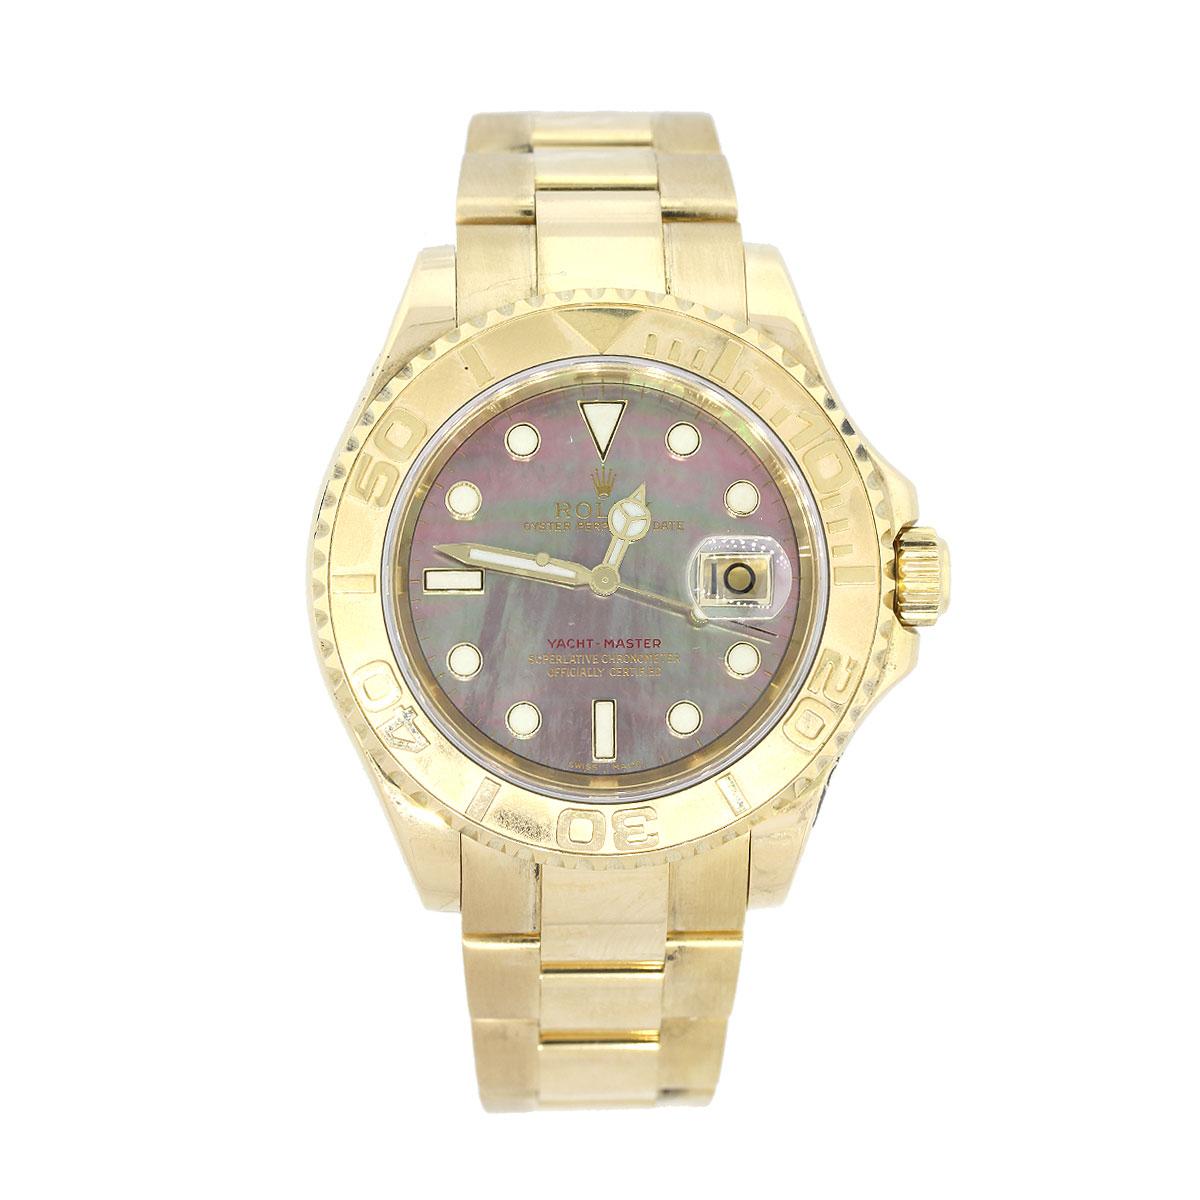 Brand: Rolex
MPN: 16628
Model: Yacht-master
Case Material: 18k yellow gold
Case Diameter: 40mm
Crystal: Sapphire crystal (scratch resistant)
Bezel: 18k yellow gold bidirectional bezel
Dial: Tahitian Mother of pearl dial with yellow gold hands and